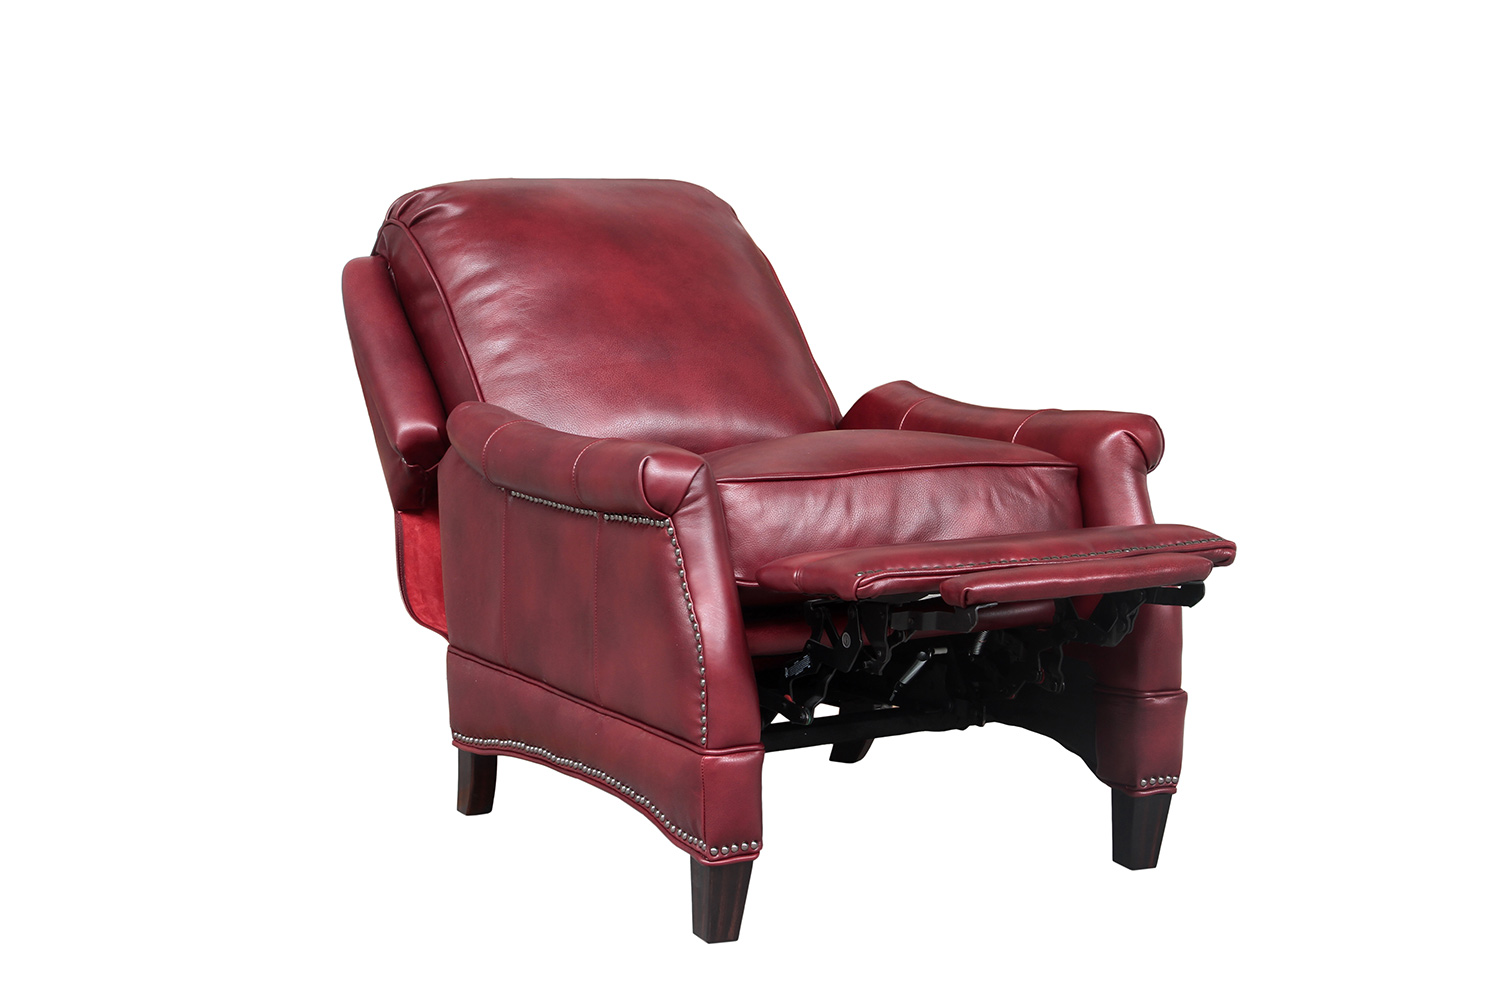 Barcalounger Ashebrooke Recliner Chair - Wenlock Carmine/All Leather